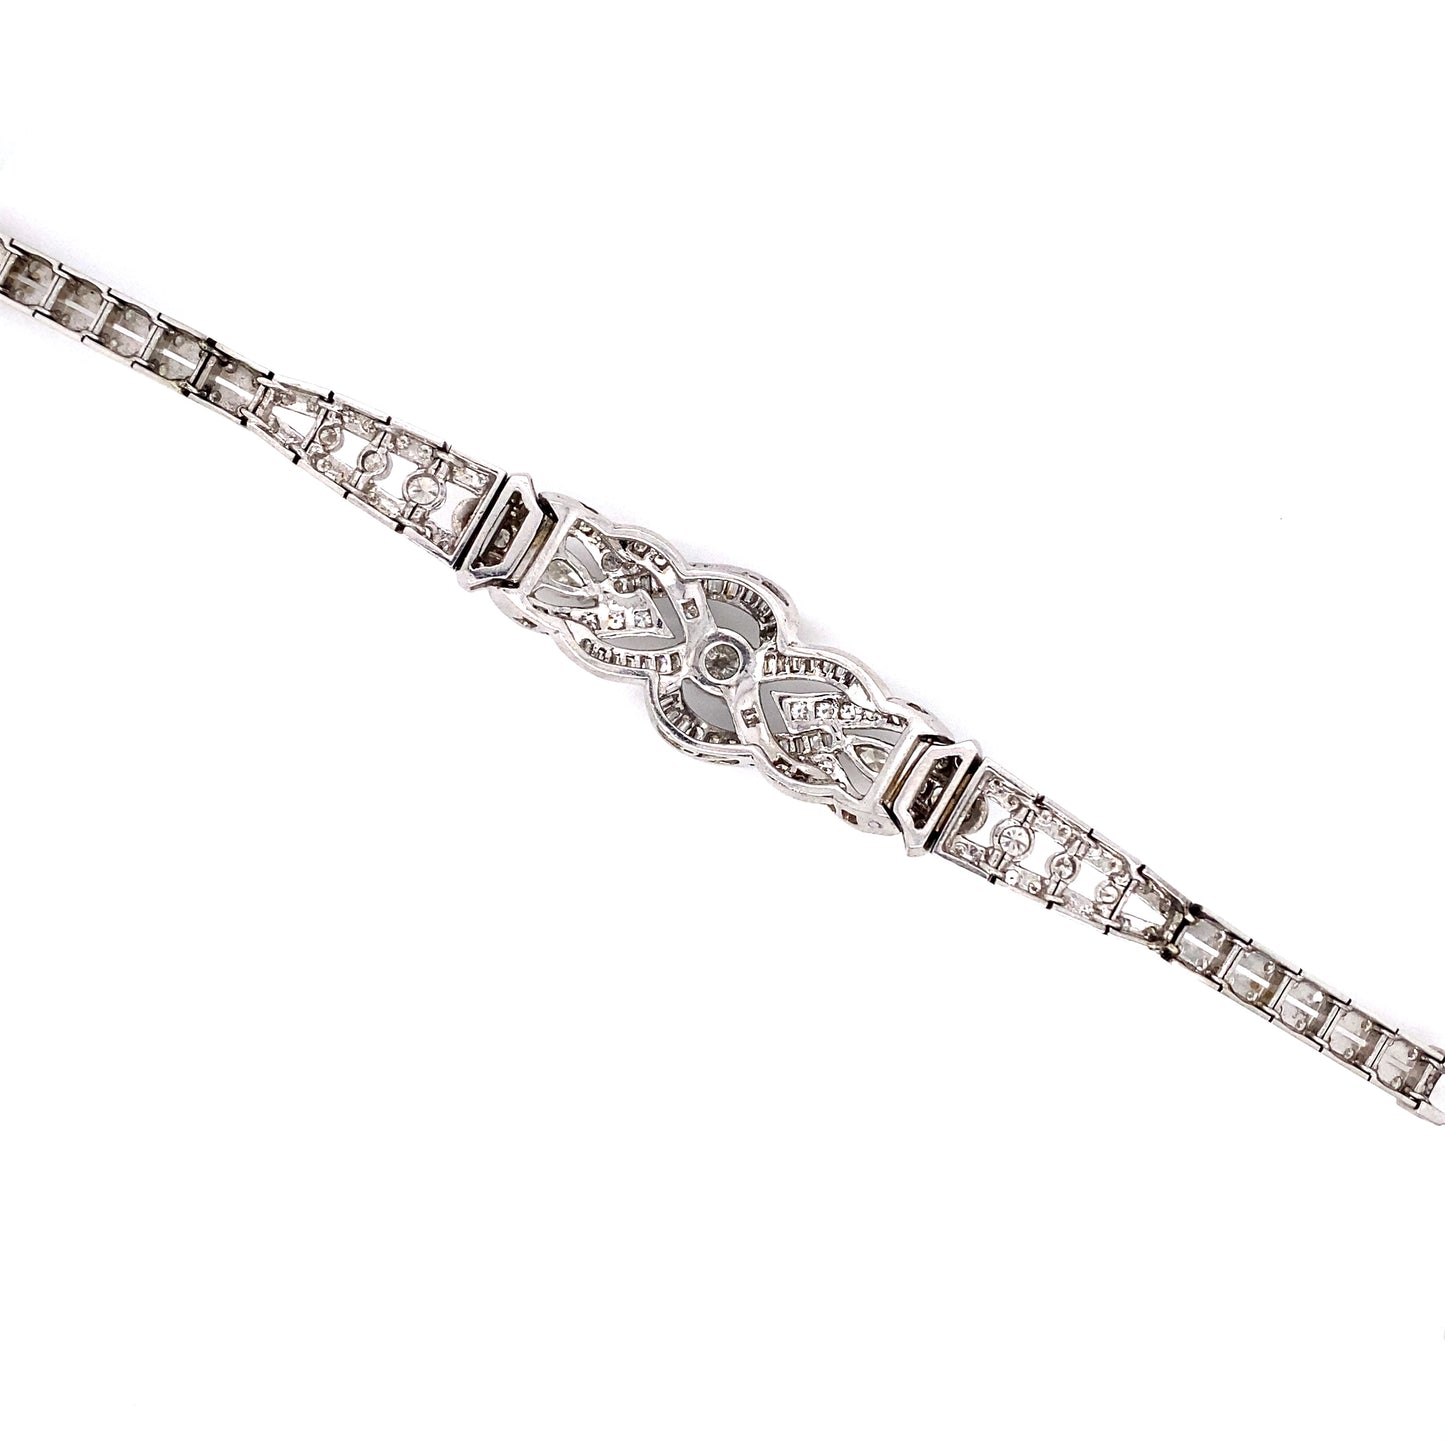 Circa 1950s 5 Carat Pear, Baguette and Round Diamond Bracelet in 14K White Gold